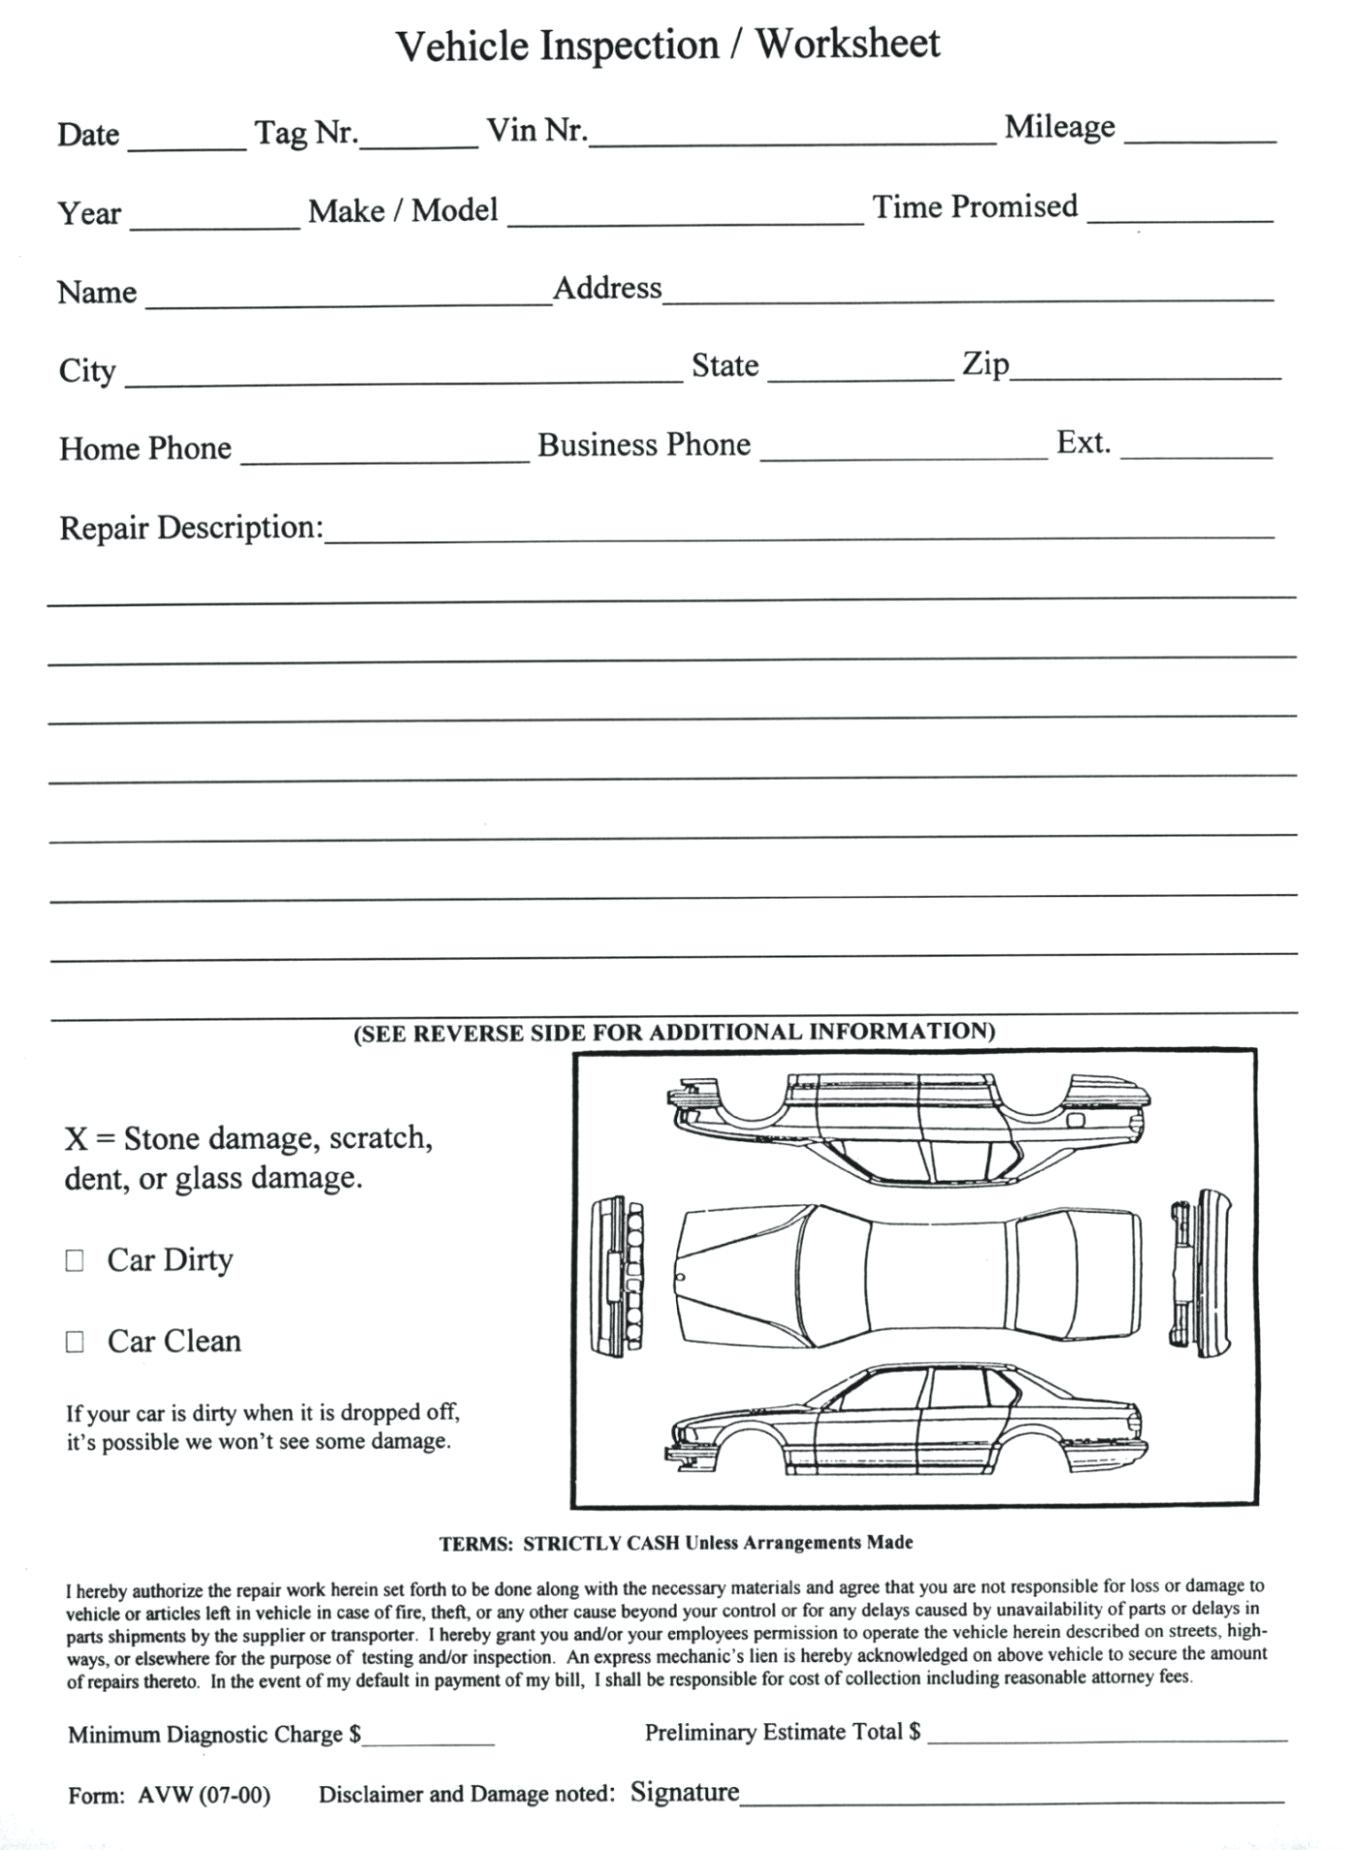 Damage Report Template – Wovensheet.co With Car Damage Report Template